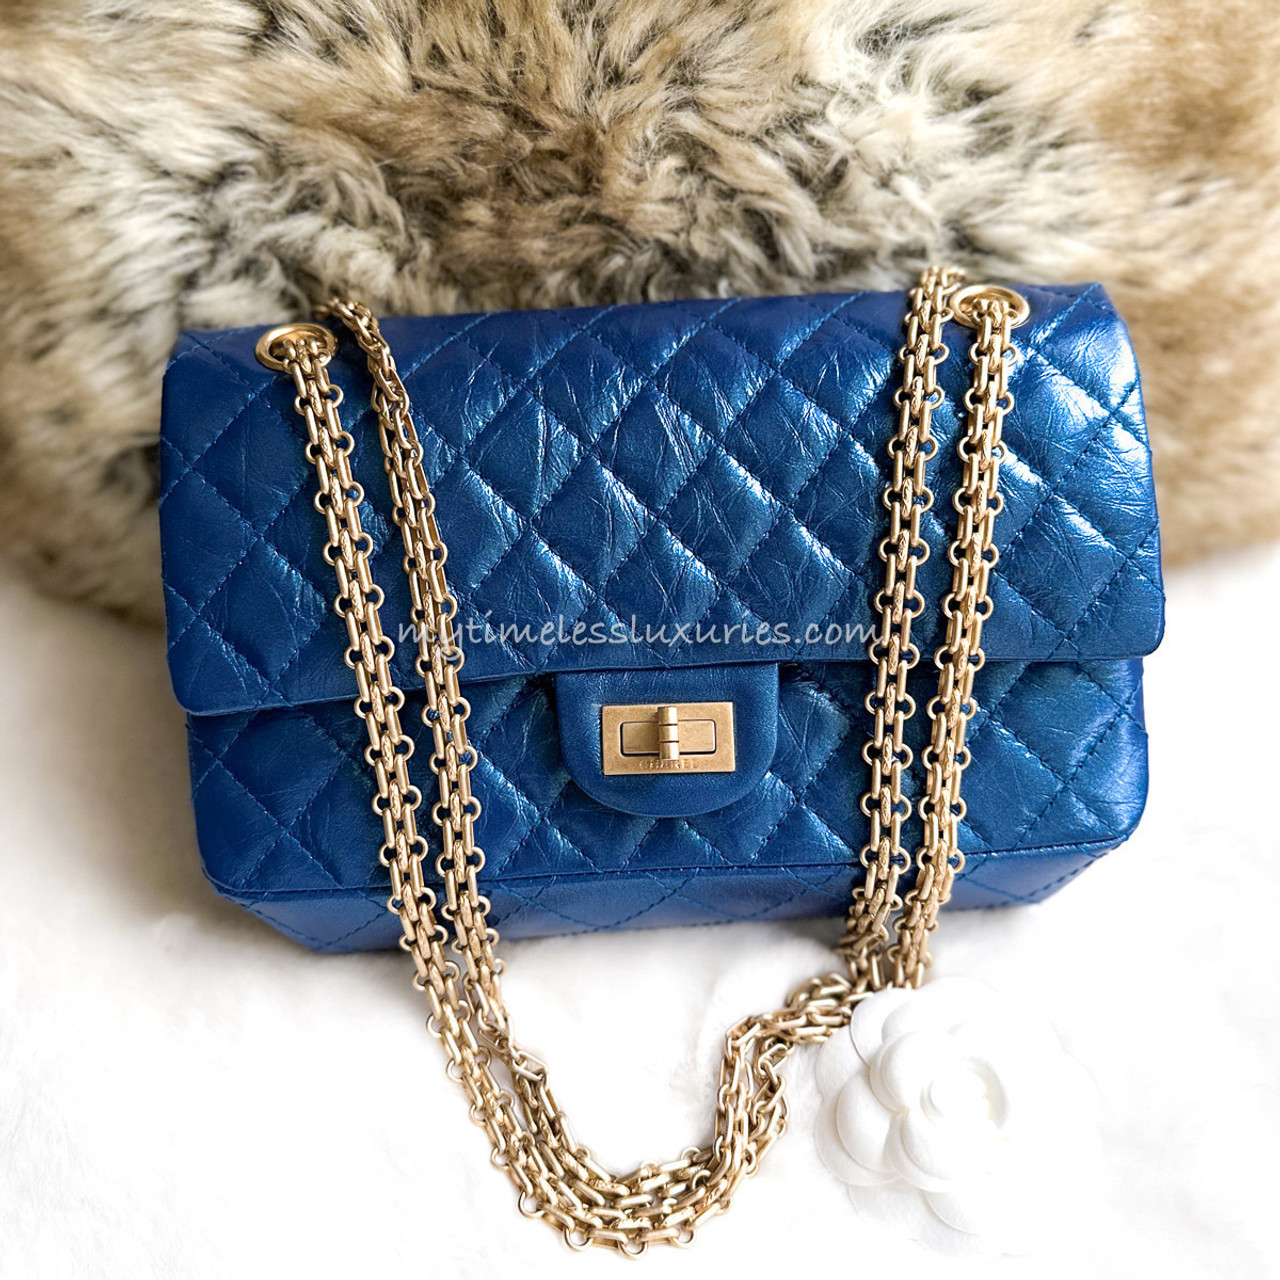 CHANEL 19A Iridescent Blue 2.55 Reissue 225 GHW *New - Timeless Luxuries